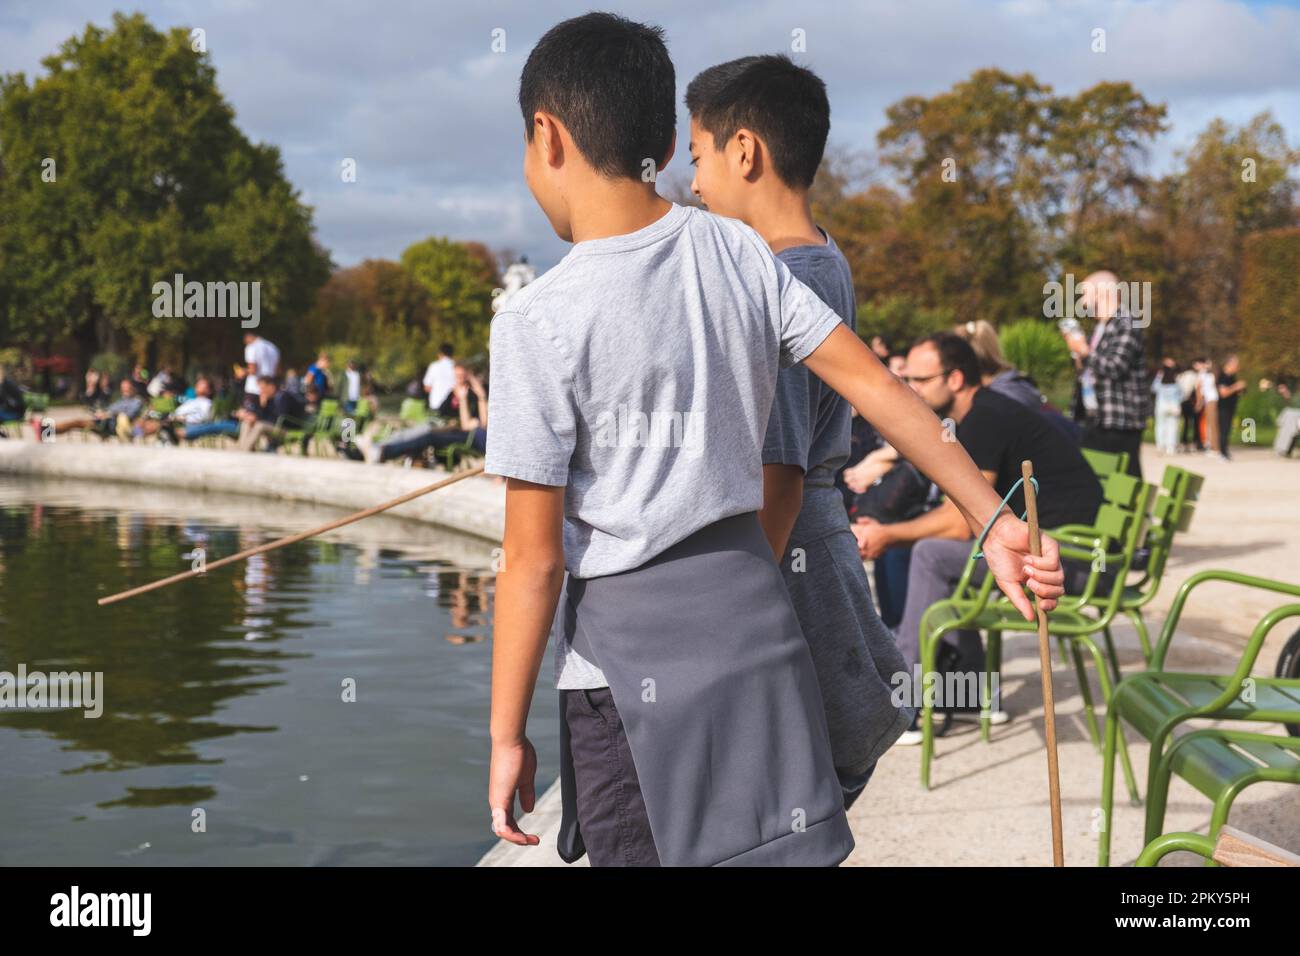 Two Brothers Exploring by the Pond in a Parisian Park Stock Photo